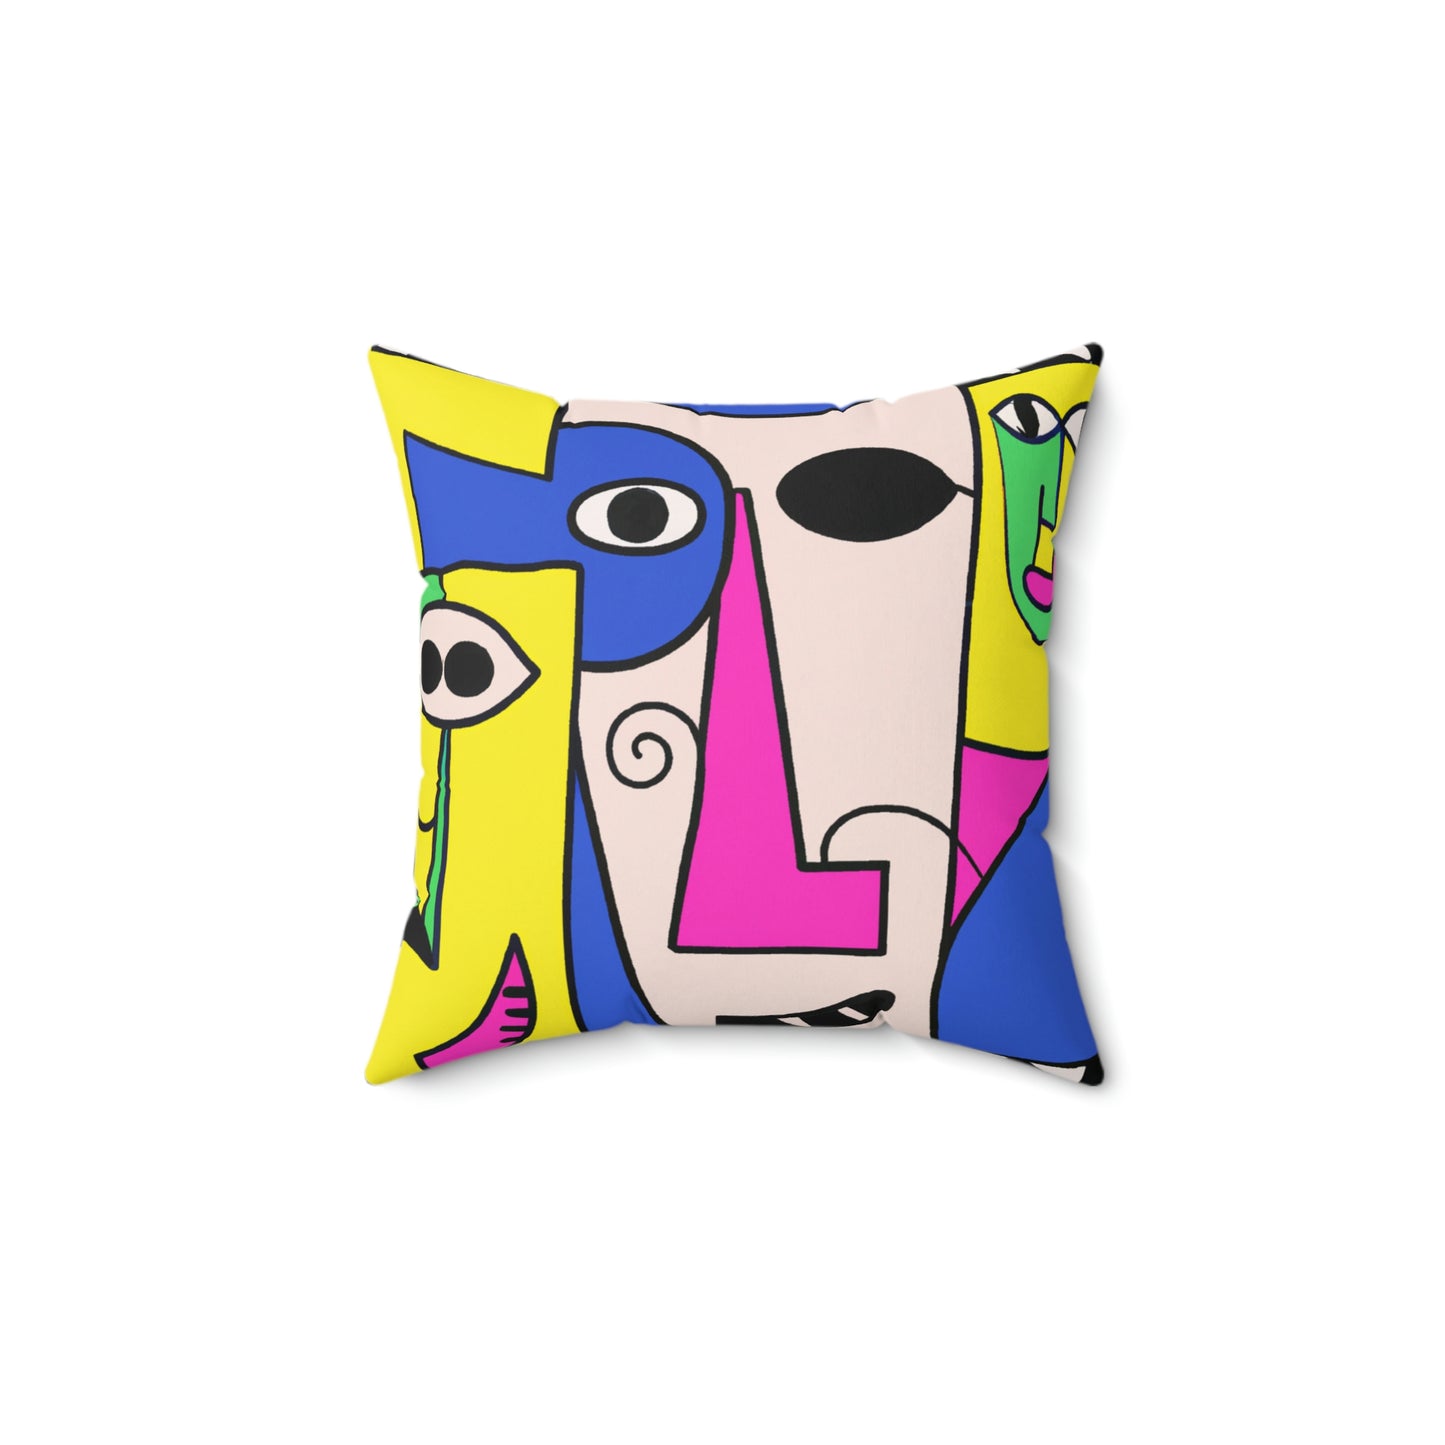 Picasso Style Decorative Polyester Square Pillow